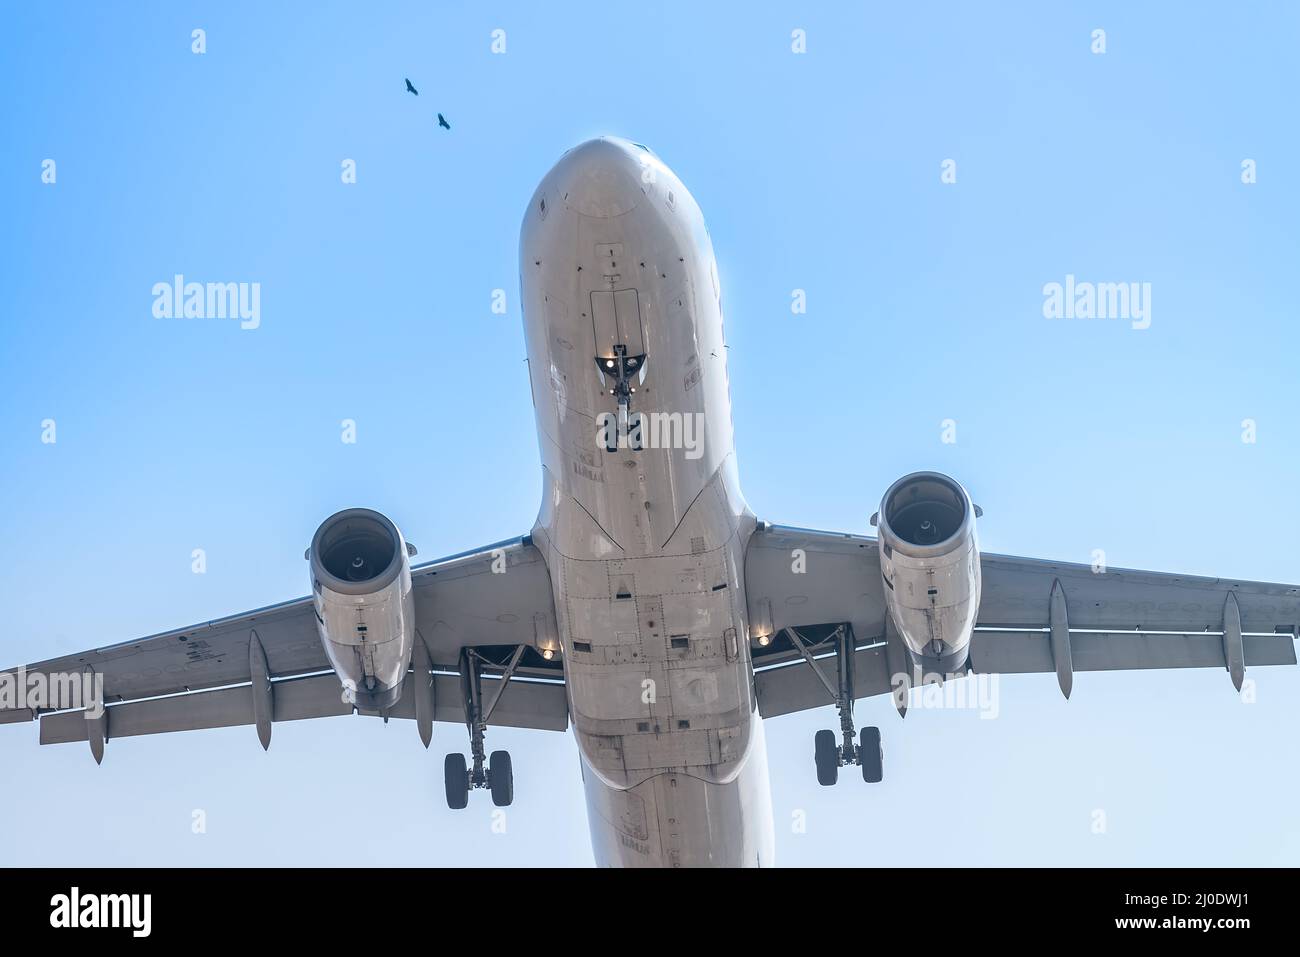 Big airplane flying with the land gear down Stock Photo